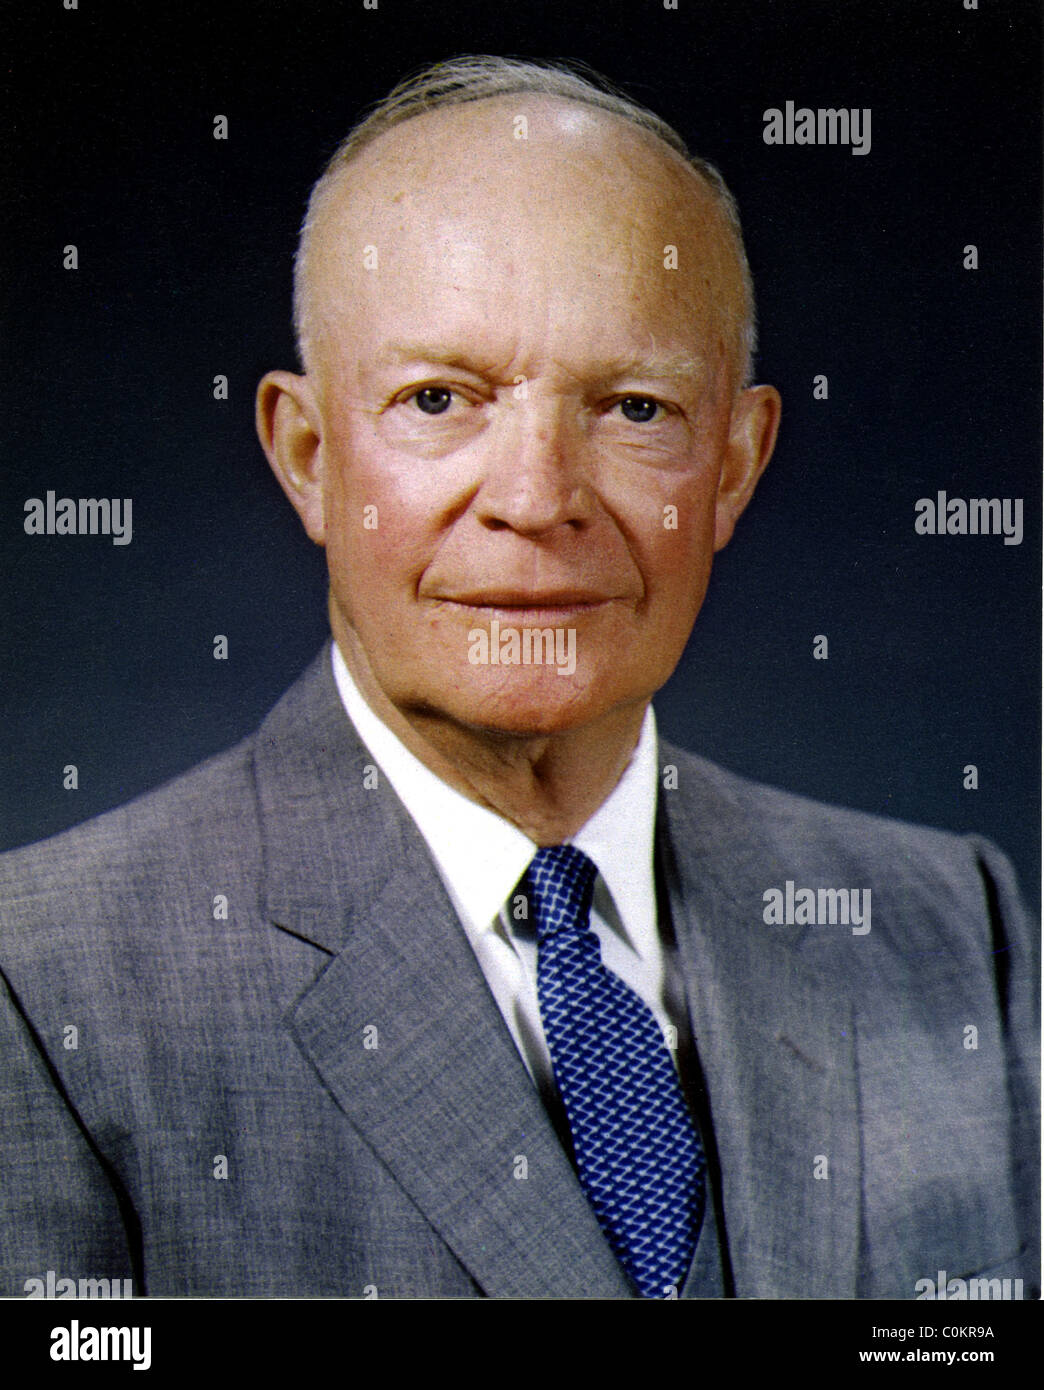 Dwight D. Eisenhower, 34th President of the United States. Stock Photo